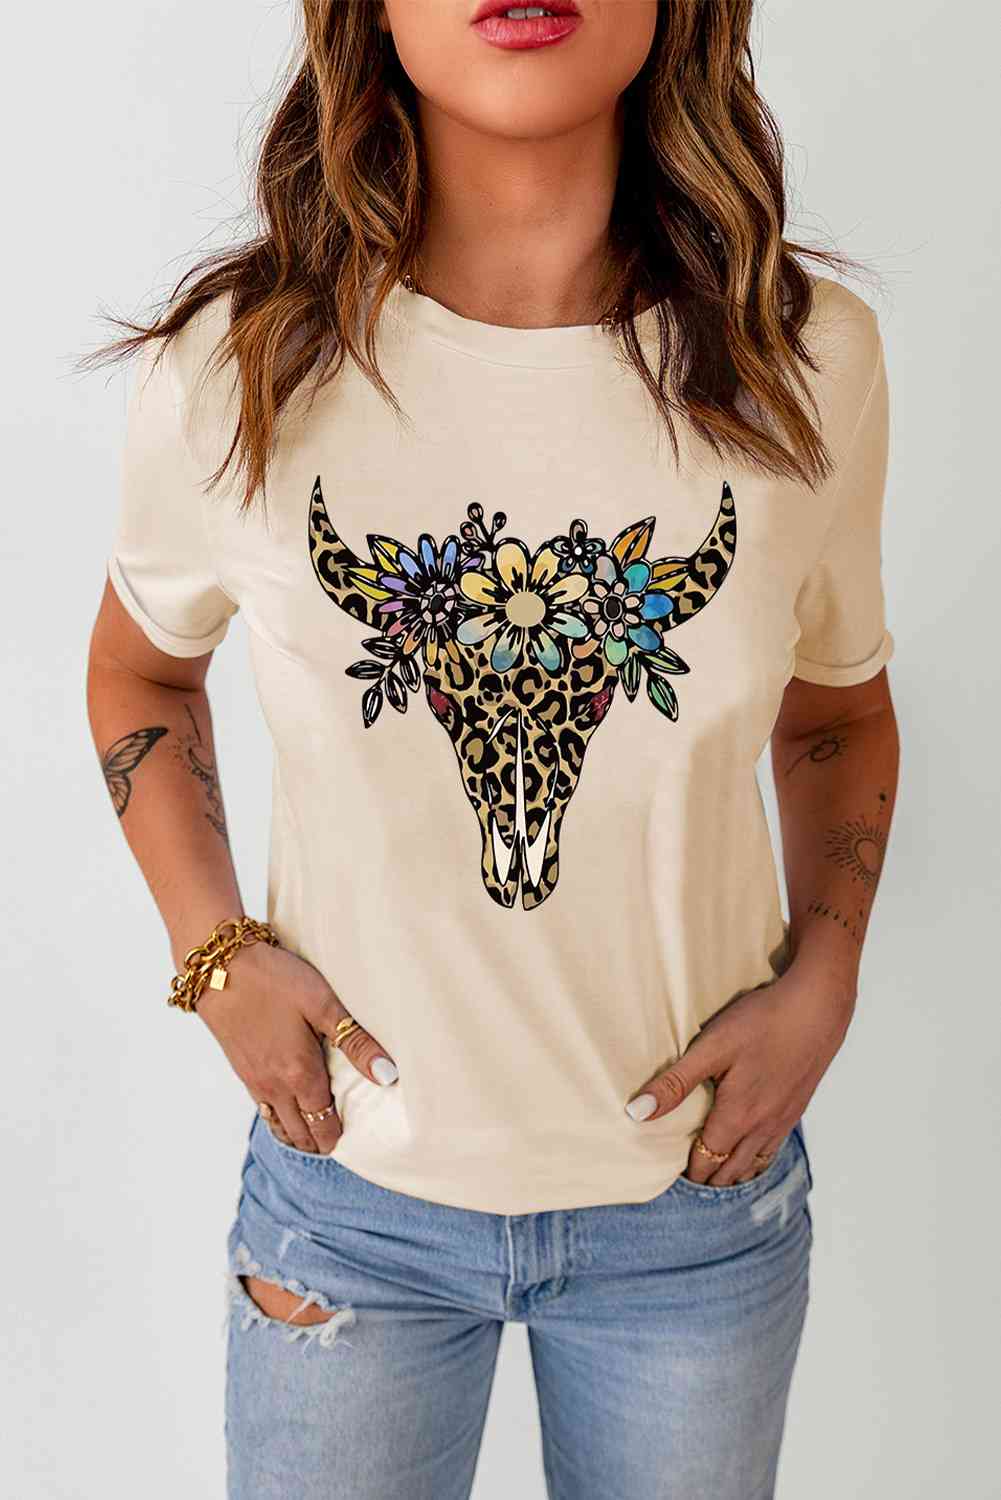 Graphic Cuffed Short Sleeve Crewneck Tee - Shop Tophatter Deals, Electronics, Fashion, Jewelry, Health, Beauty, Home Decor, Free Shipping